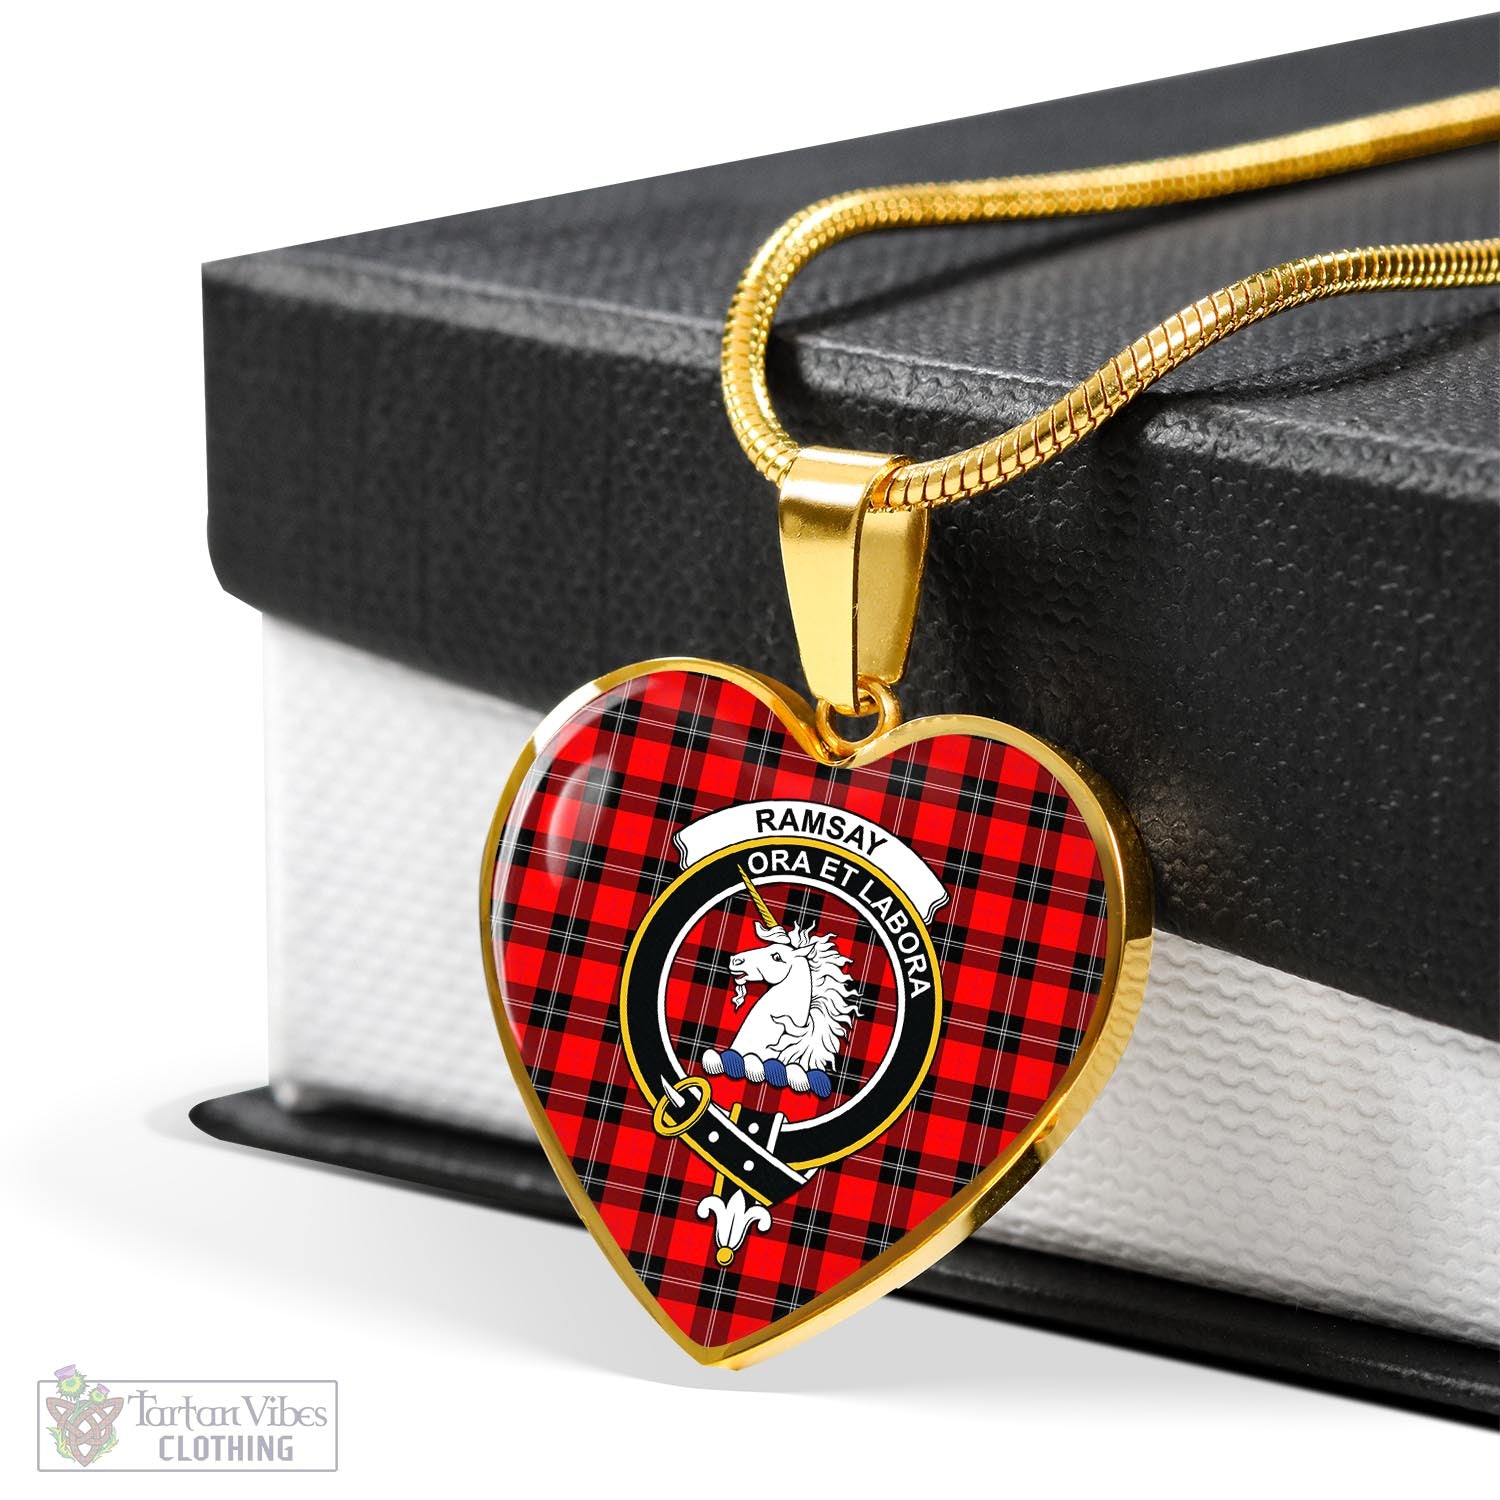 Tartan Vibes Clothing Ramsay Modern Tartan Heart Necklace with Family Crest